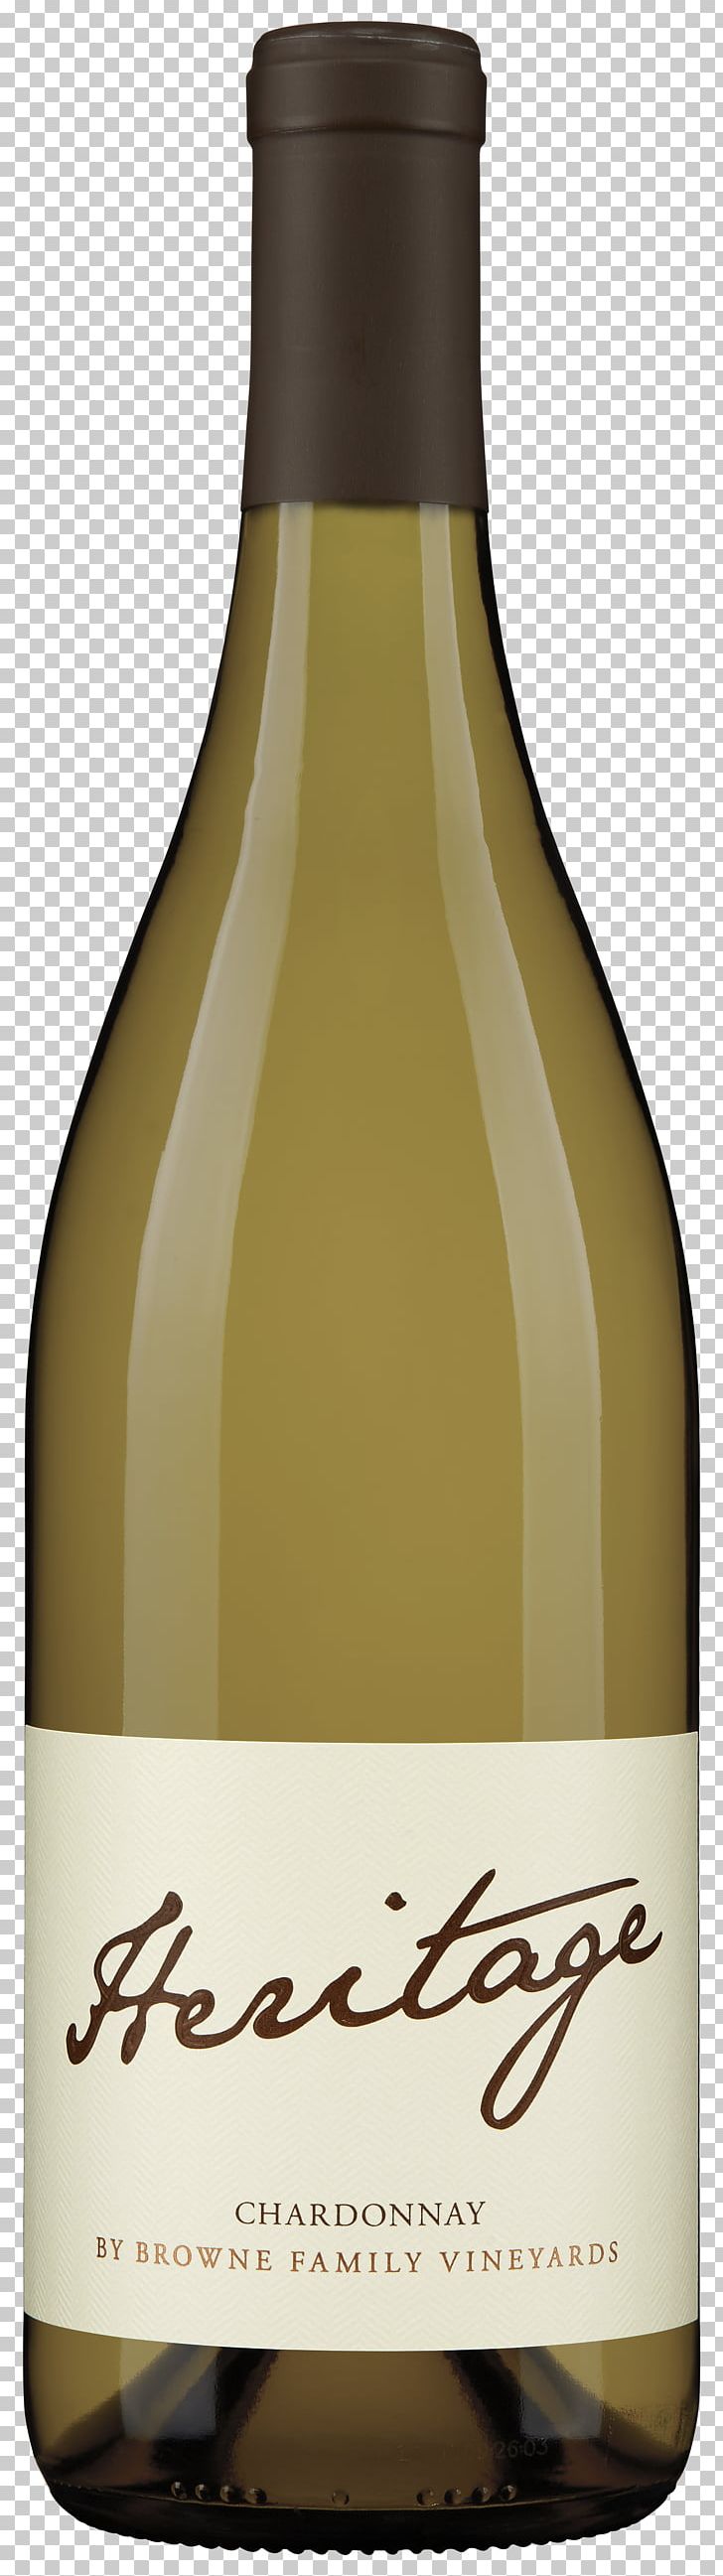 White Wine Cabernet Sauvignon Riesling Chardonnay PNG, Clipart, Alcoholic Beverage, Australian Wine, Bottle, Cabernet Franc, Cabernet Sauvignon Free PNG Download